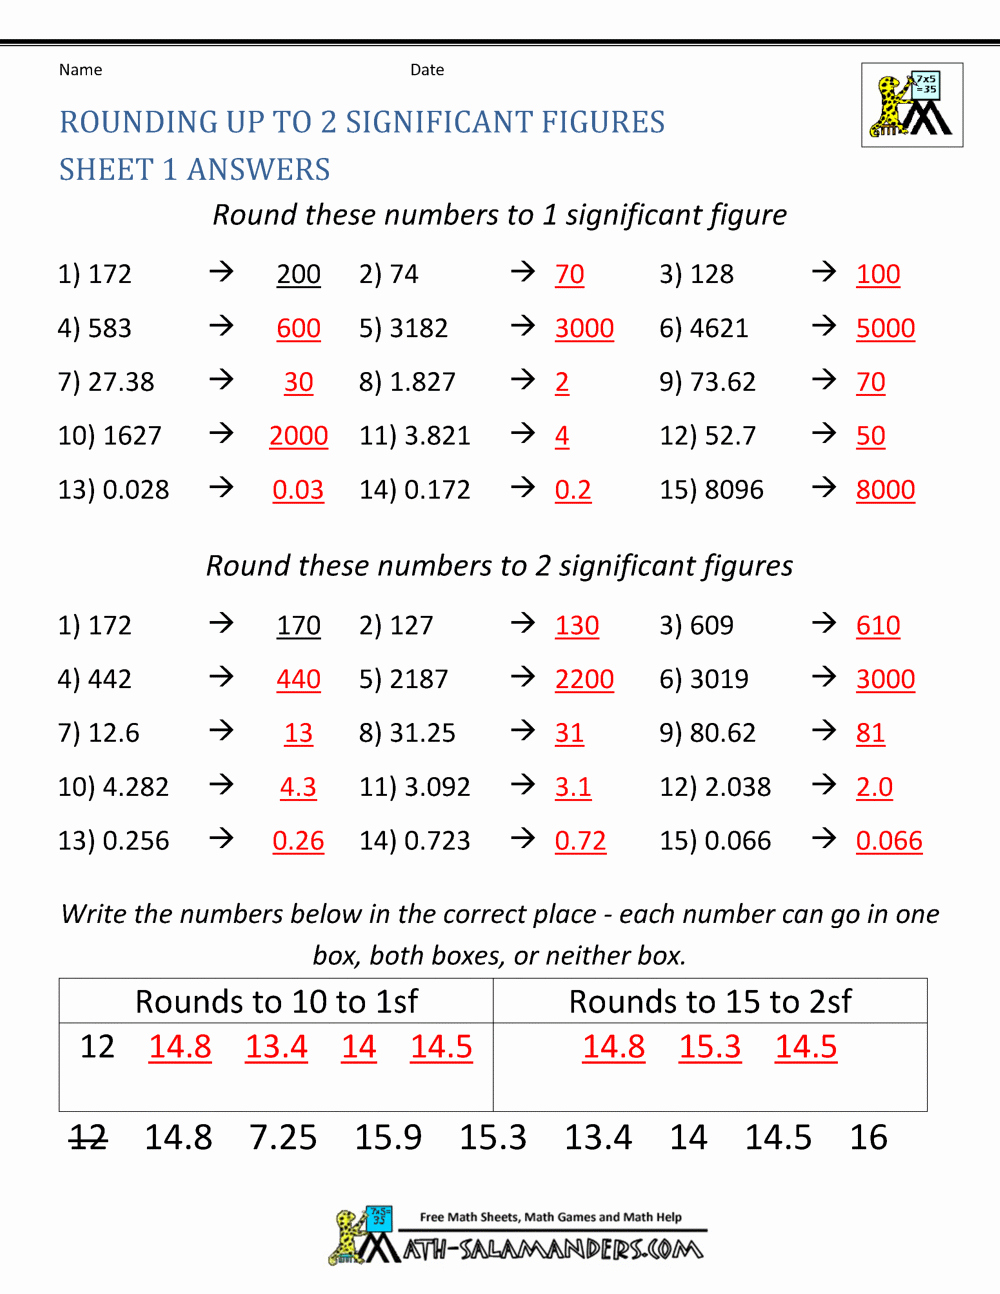 50 Significant Figures Worksheet With Answers